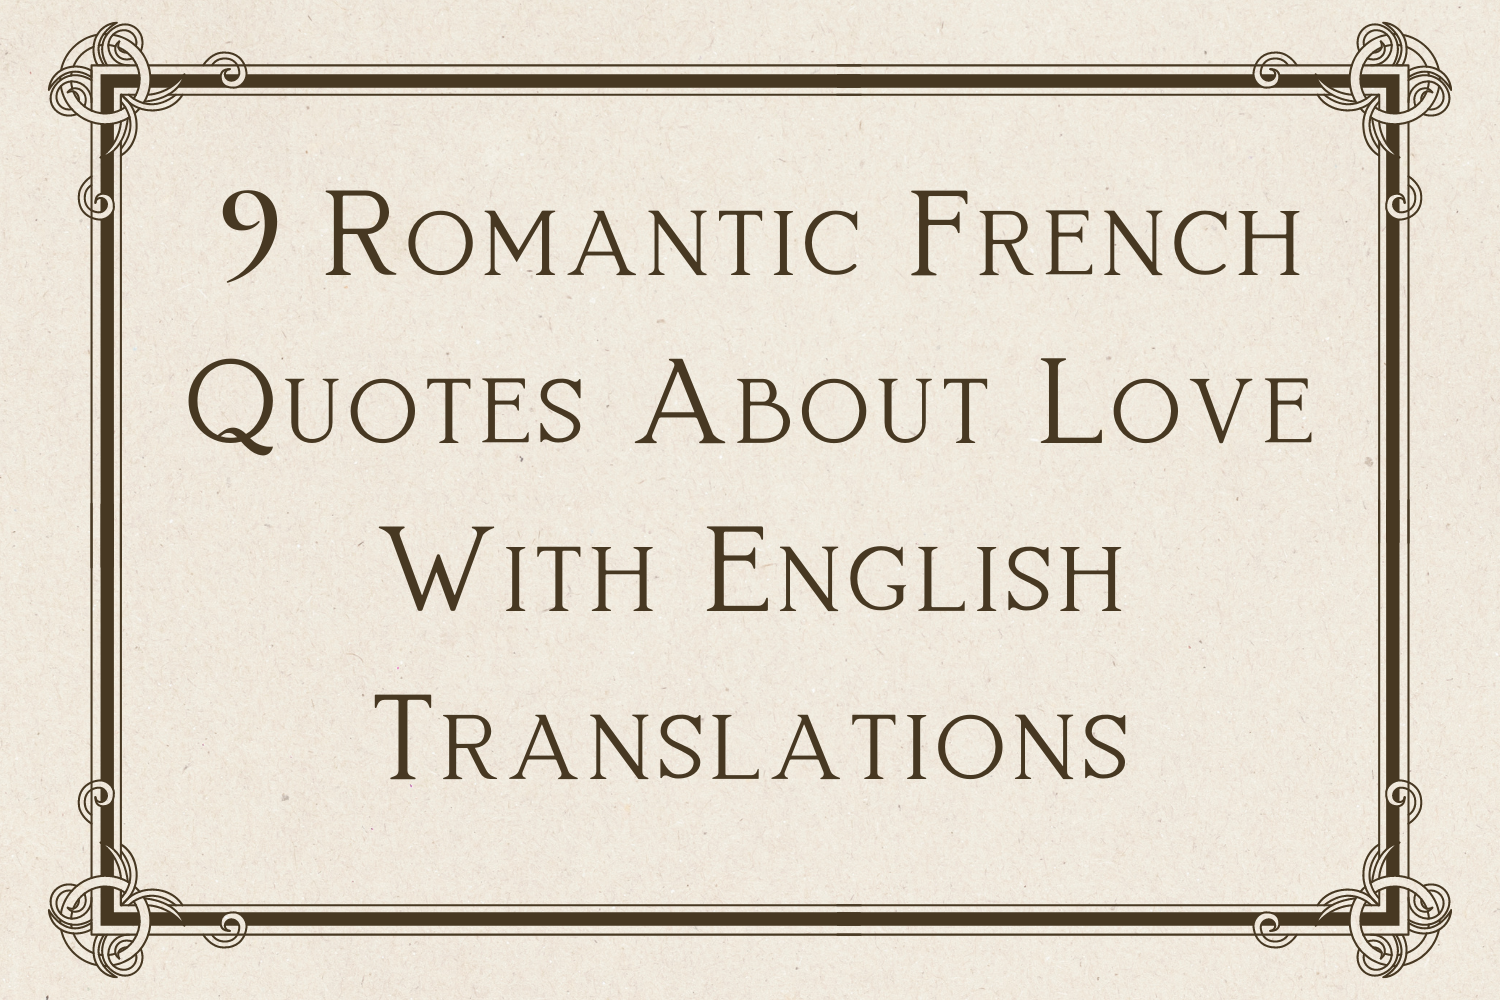 french sayings and meanings